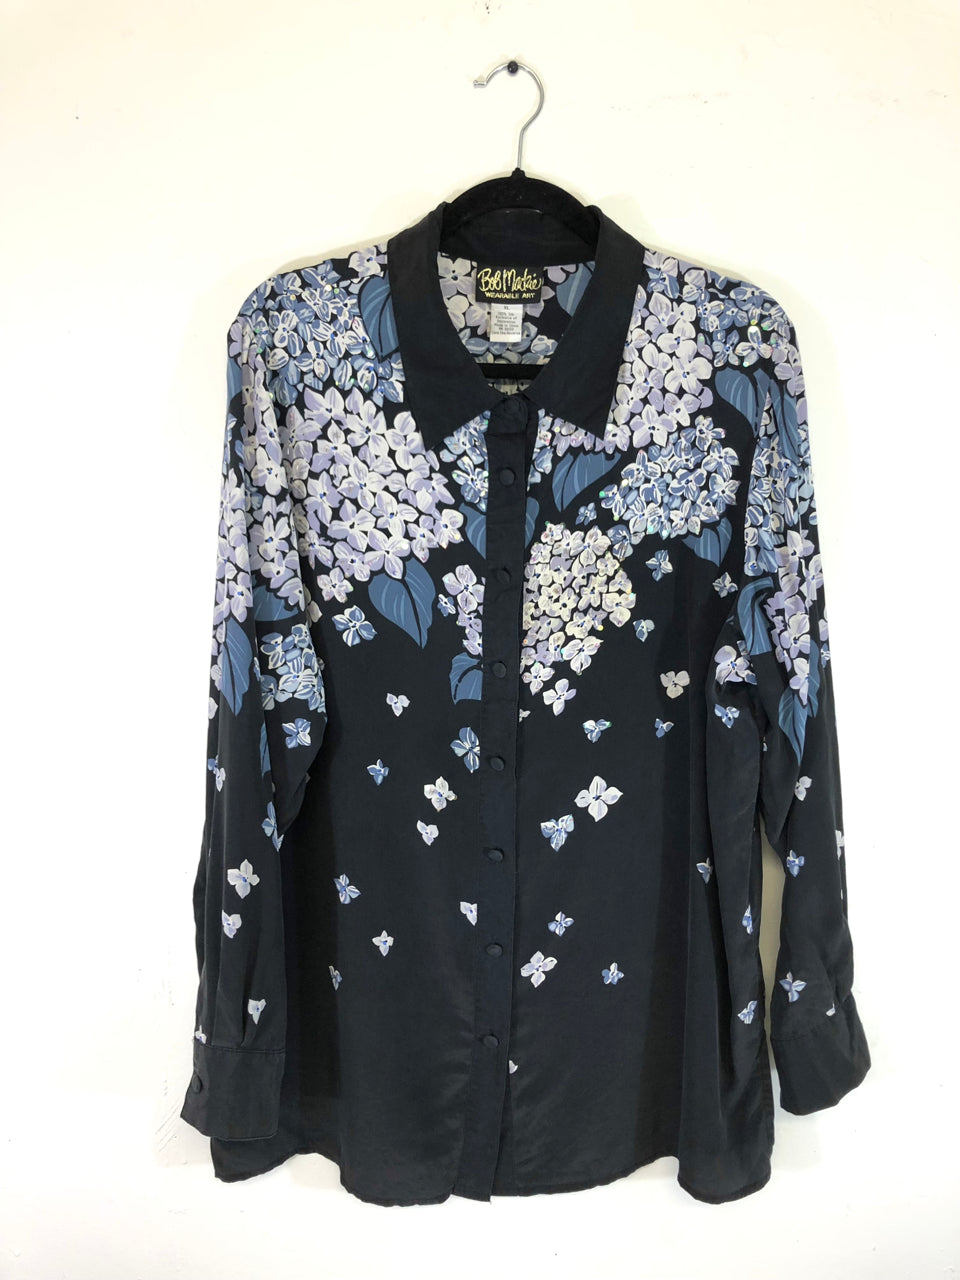 Bob Mackie Floral Sequined & Beaded Blouse (Variation 3)